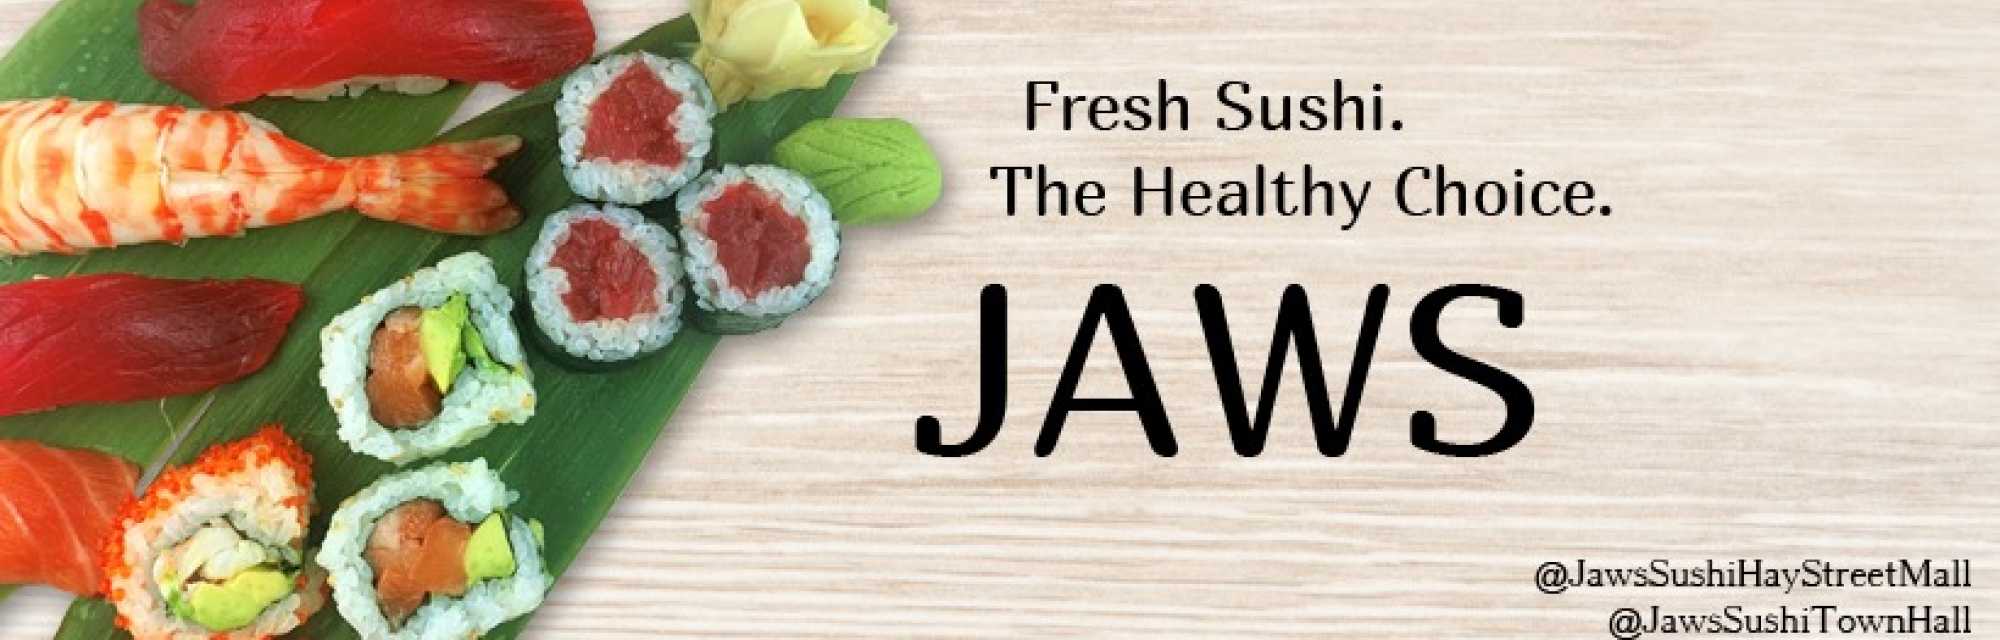 Jaws Sushi East Perth